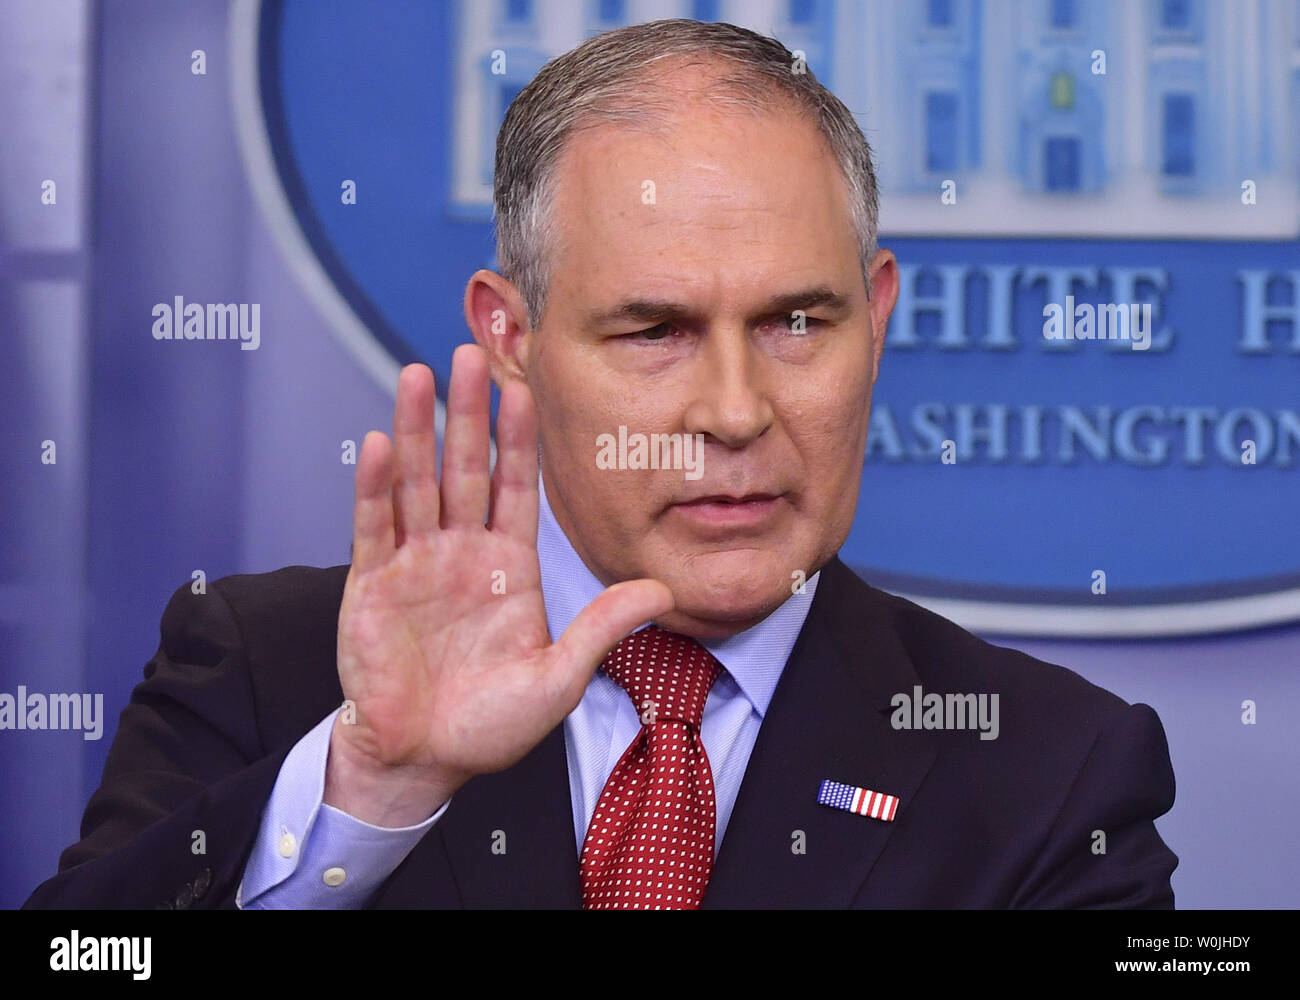 Scott Pruitt, EPA Administrator, speaks about President Turmp's decision to leave the Paris Climate Agreement, during the daily press briefing at the White House in Washington, D.C. on June 2, 2017. Photo by Kevin Dietsch/UPI Stock Photo